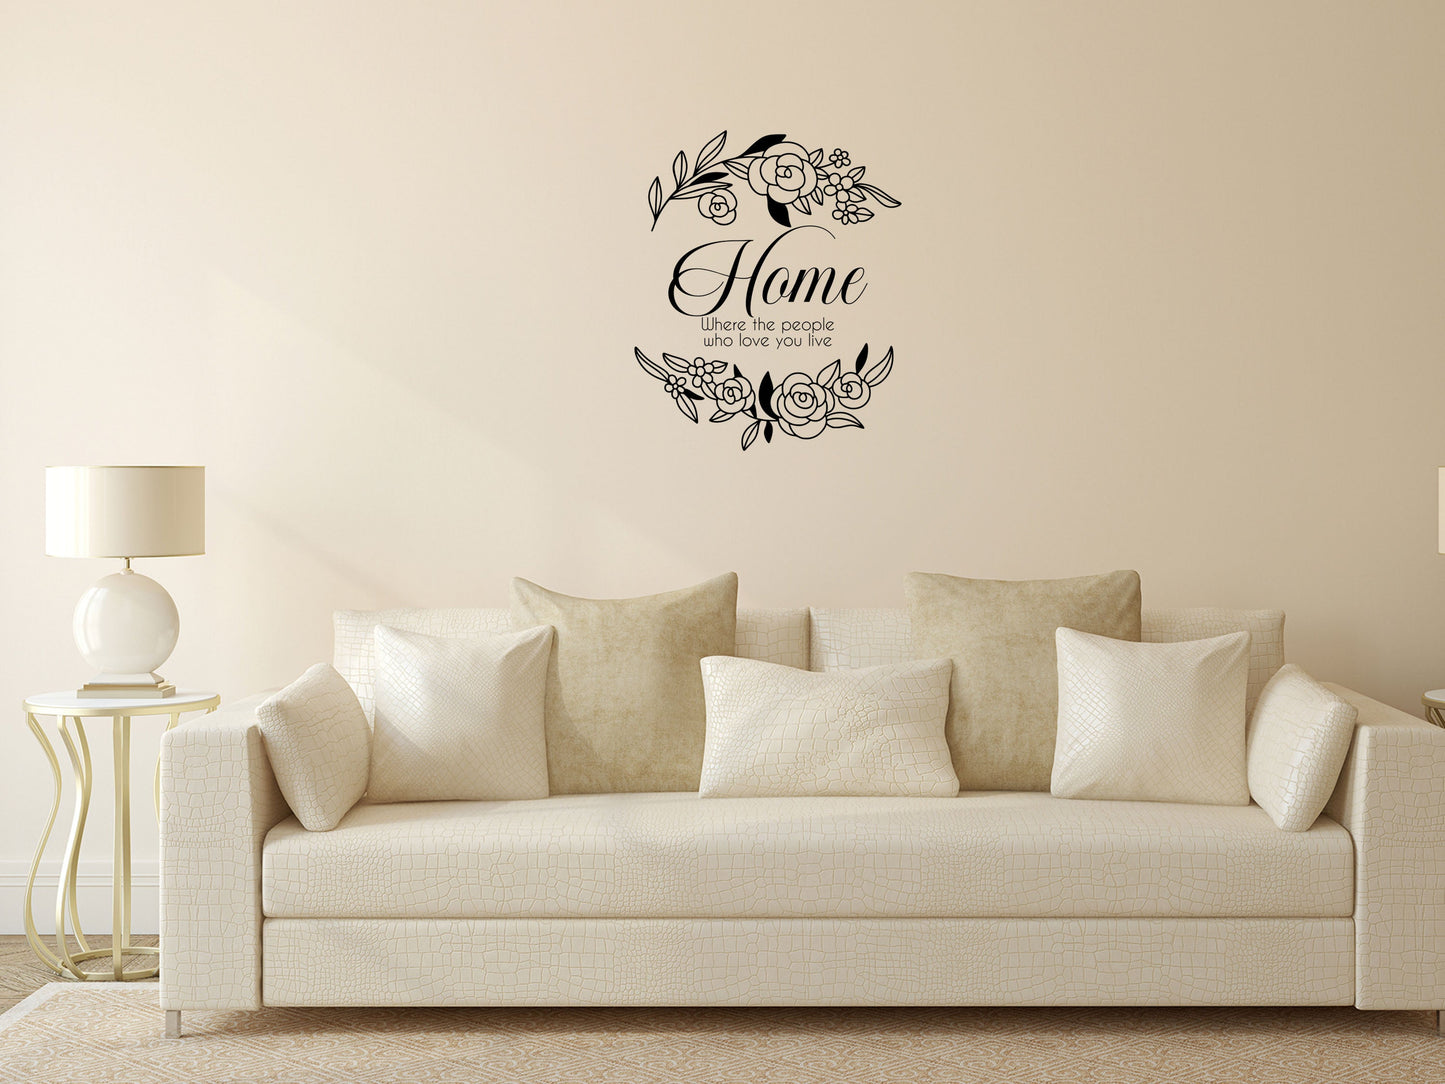 Home Where The People Who Love You Live - Inspirational Wall Decals Vinyl Wall Decal Inspirational Wall Signs 